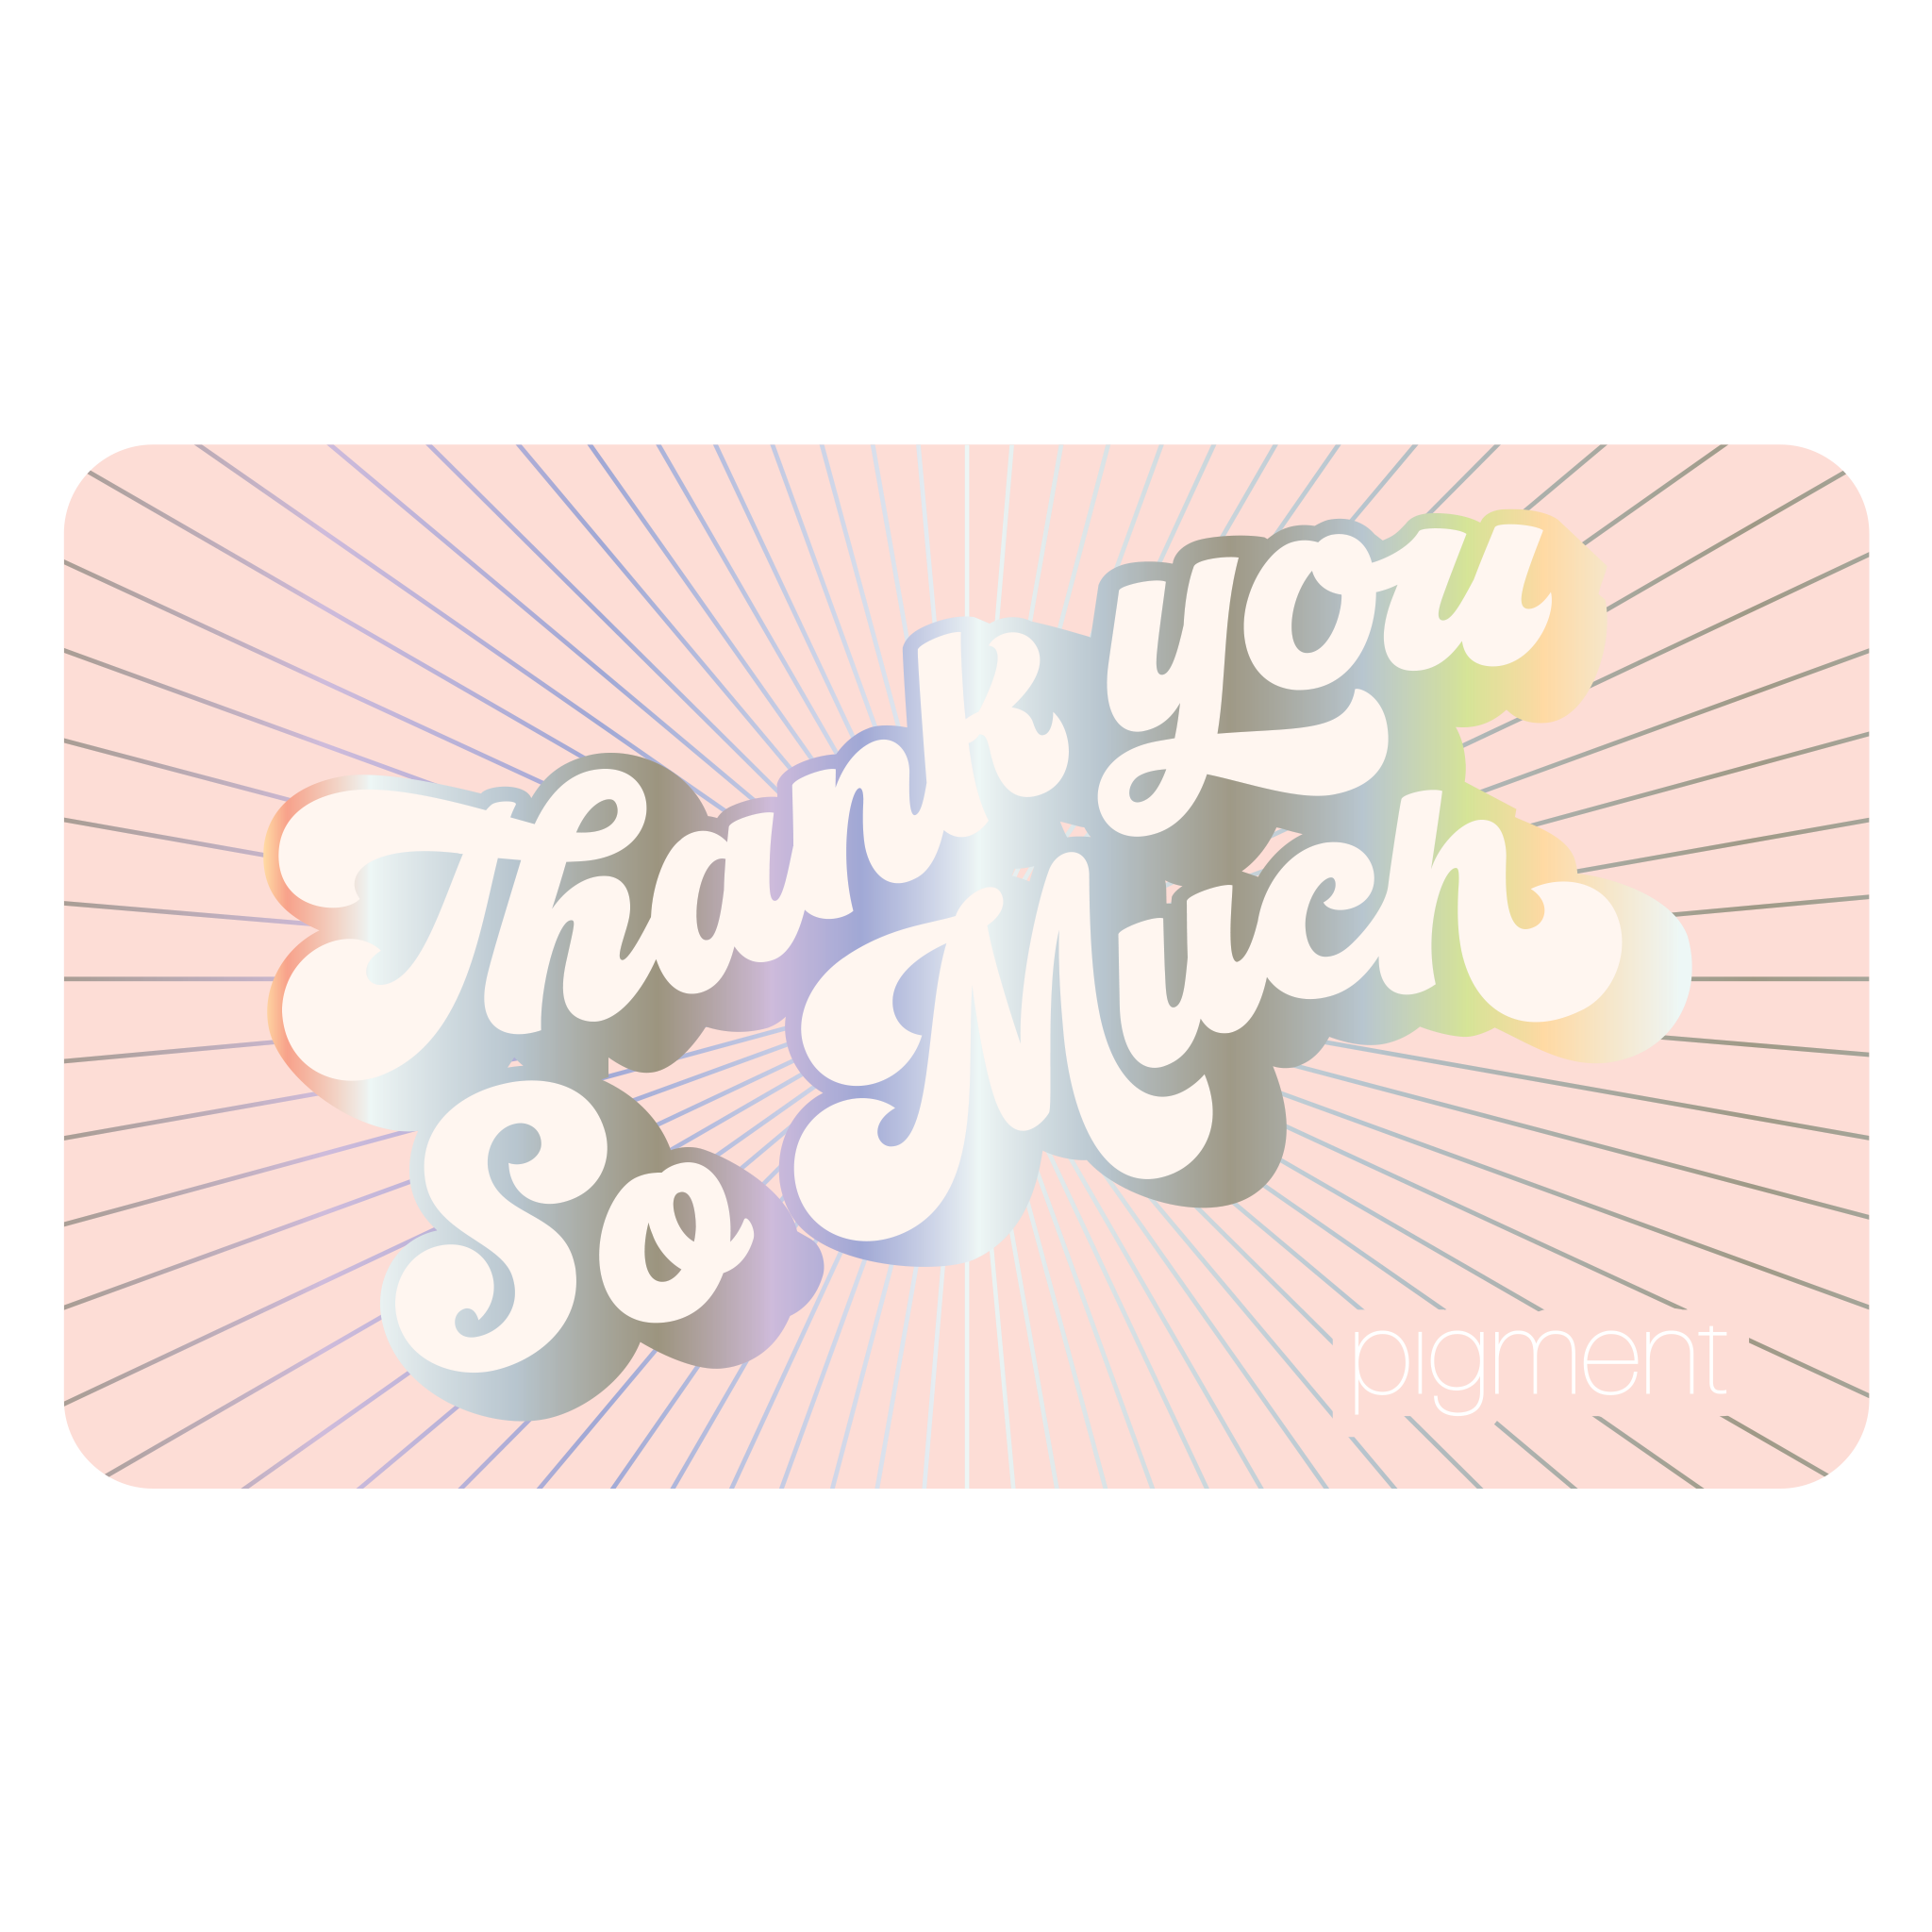 On a white background is a light pink gift card with silver holographic rays from out from text in the center that reads, "Thank You So Much" in a groovy font. 